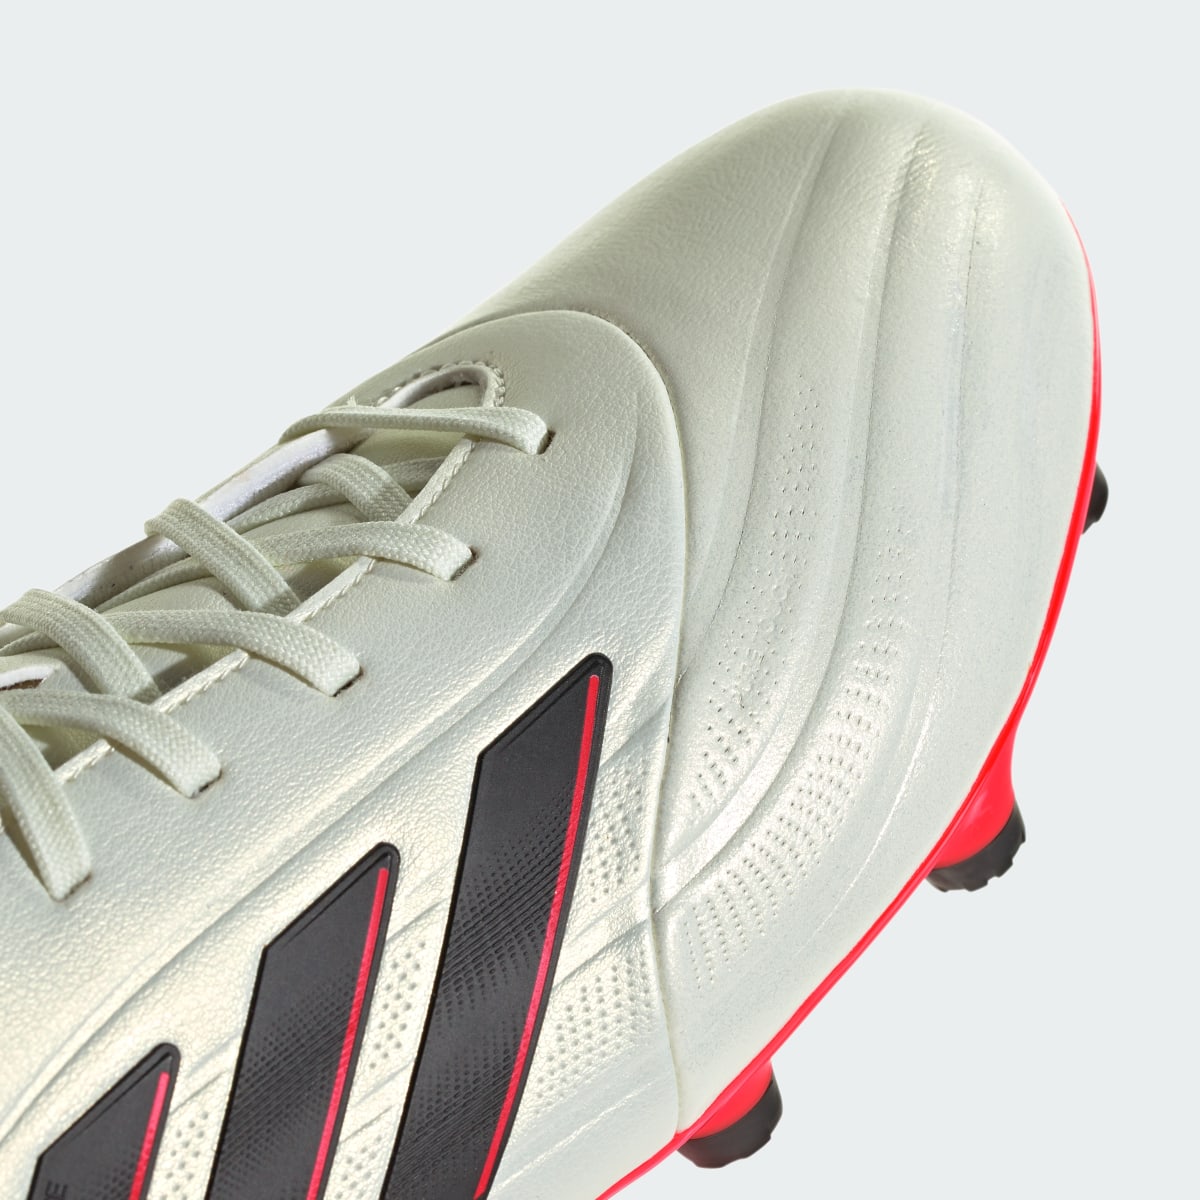 Adidas Copa Pure II League Firm Ground Boots. 12